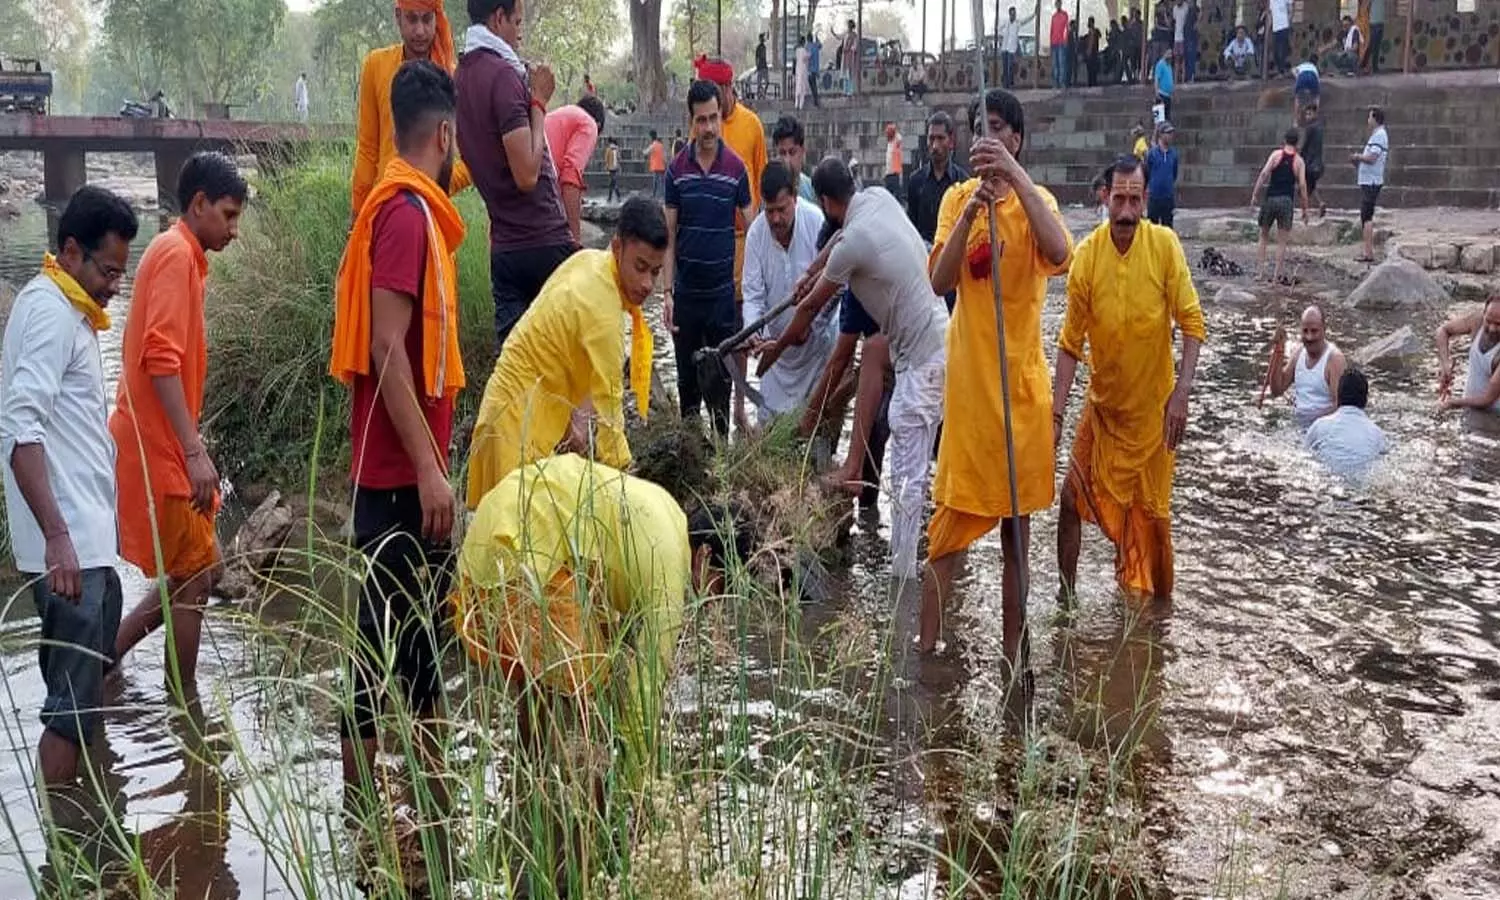 Gayatri Shaktipeeth launched cleanliness campaign for Mandakini river, hundreds of volunteers participated